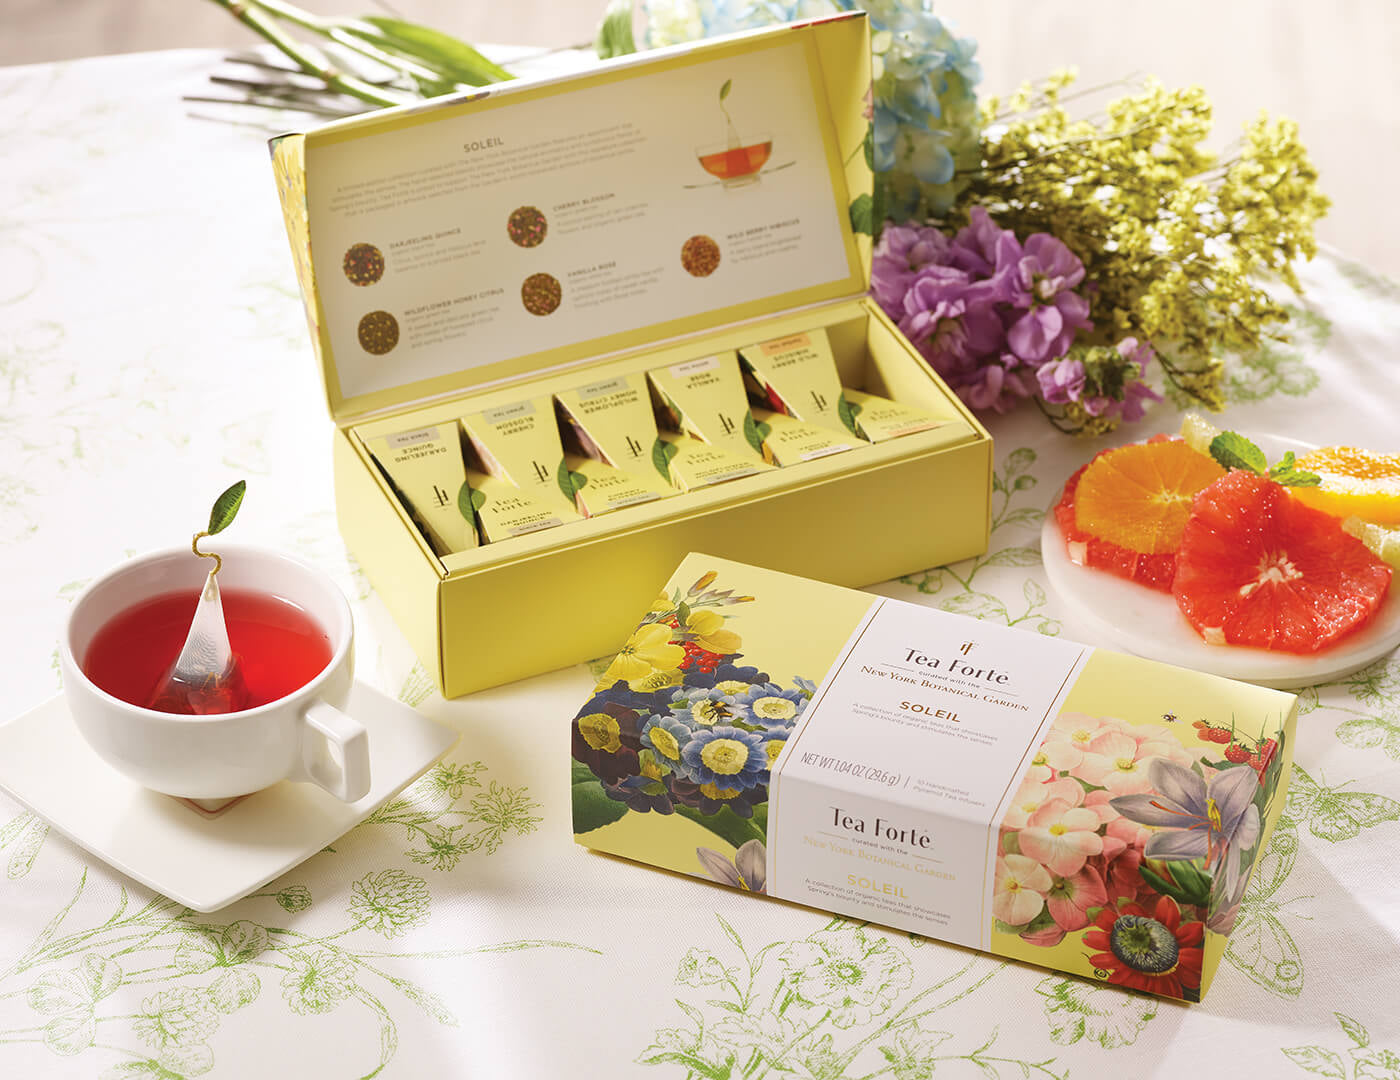 Soleil tea assortment in a 10 count petite presentation box on table